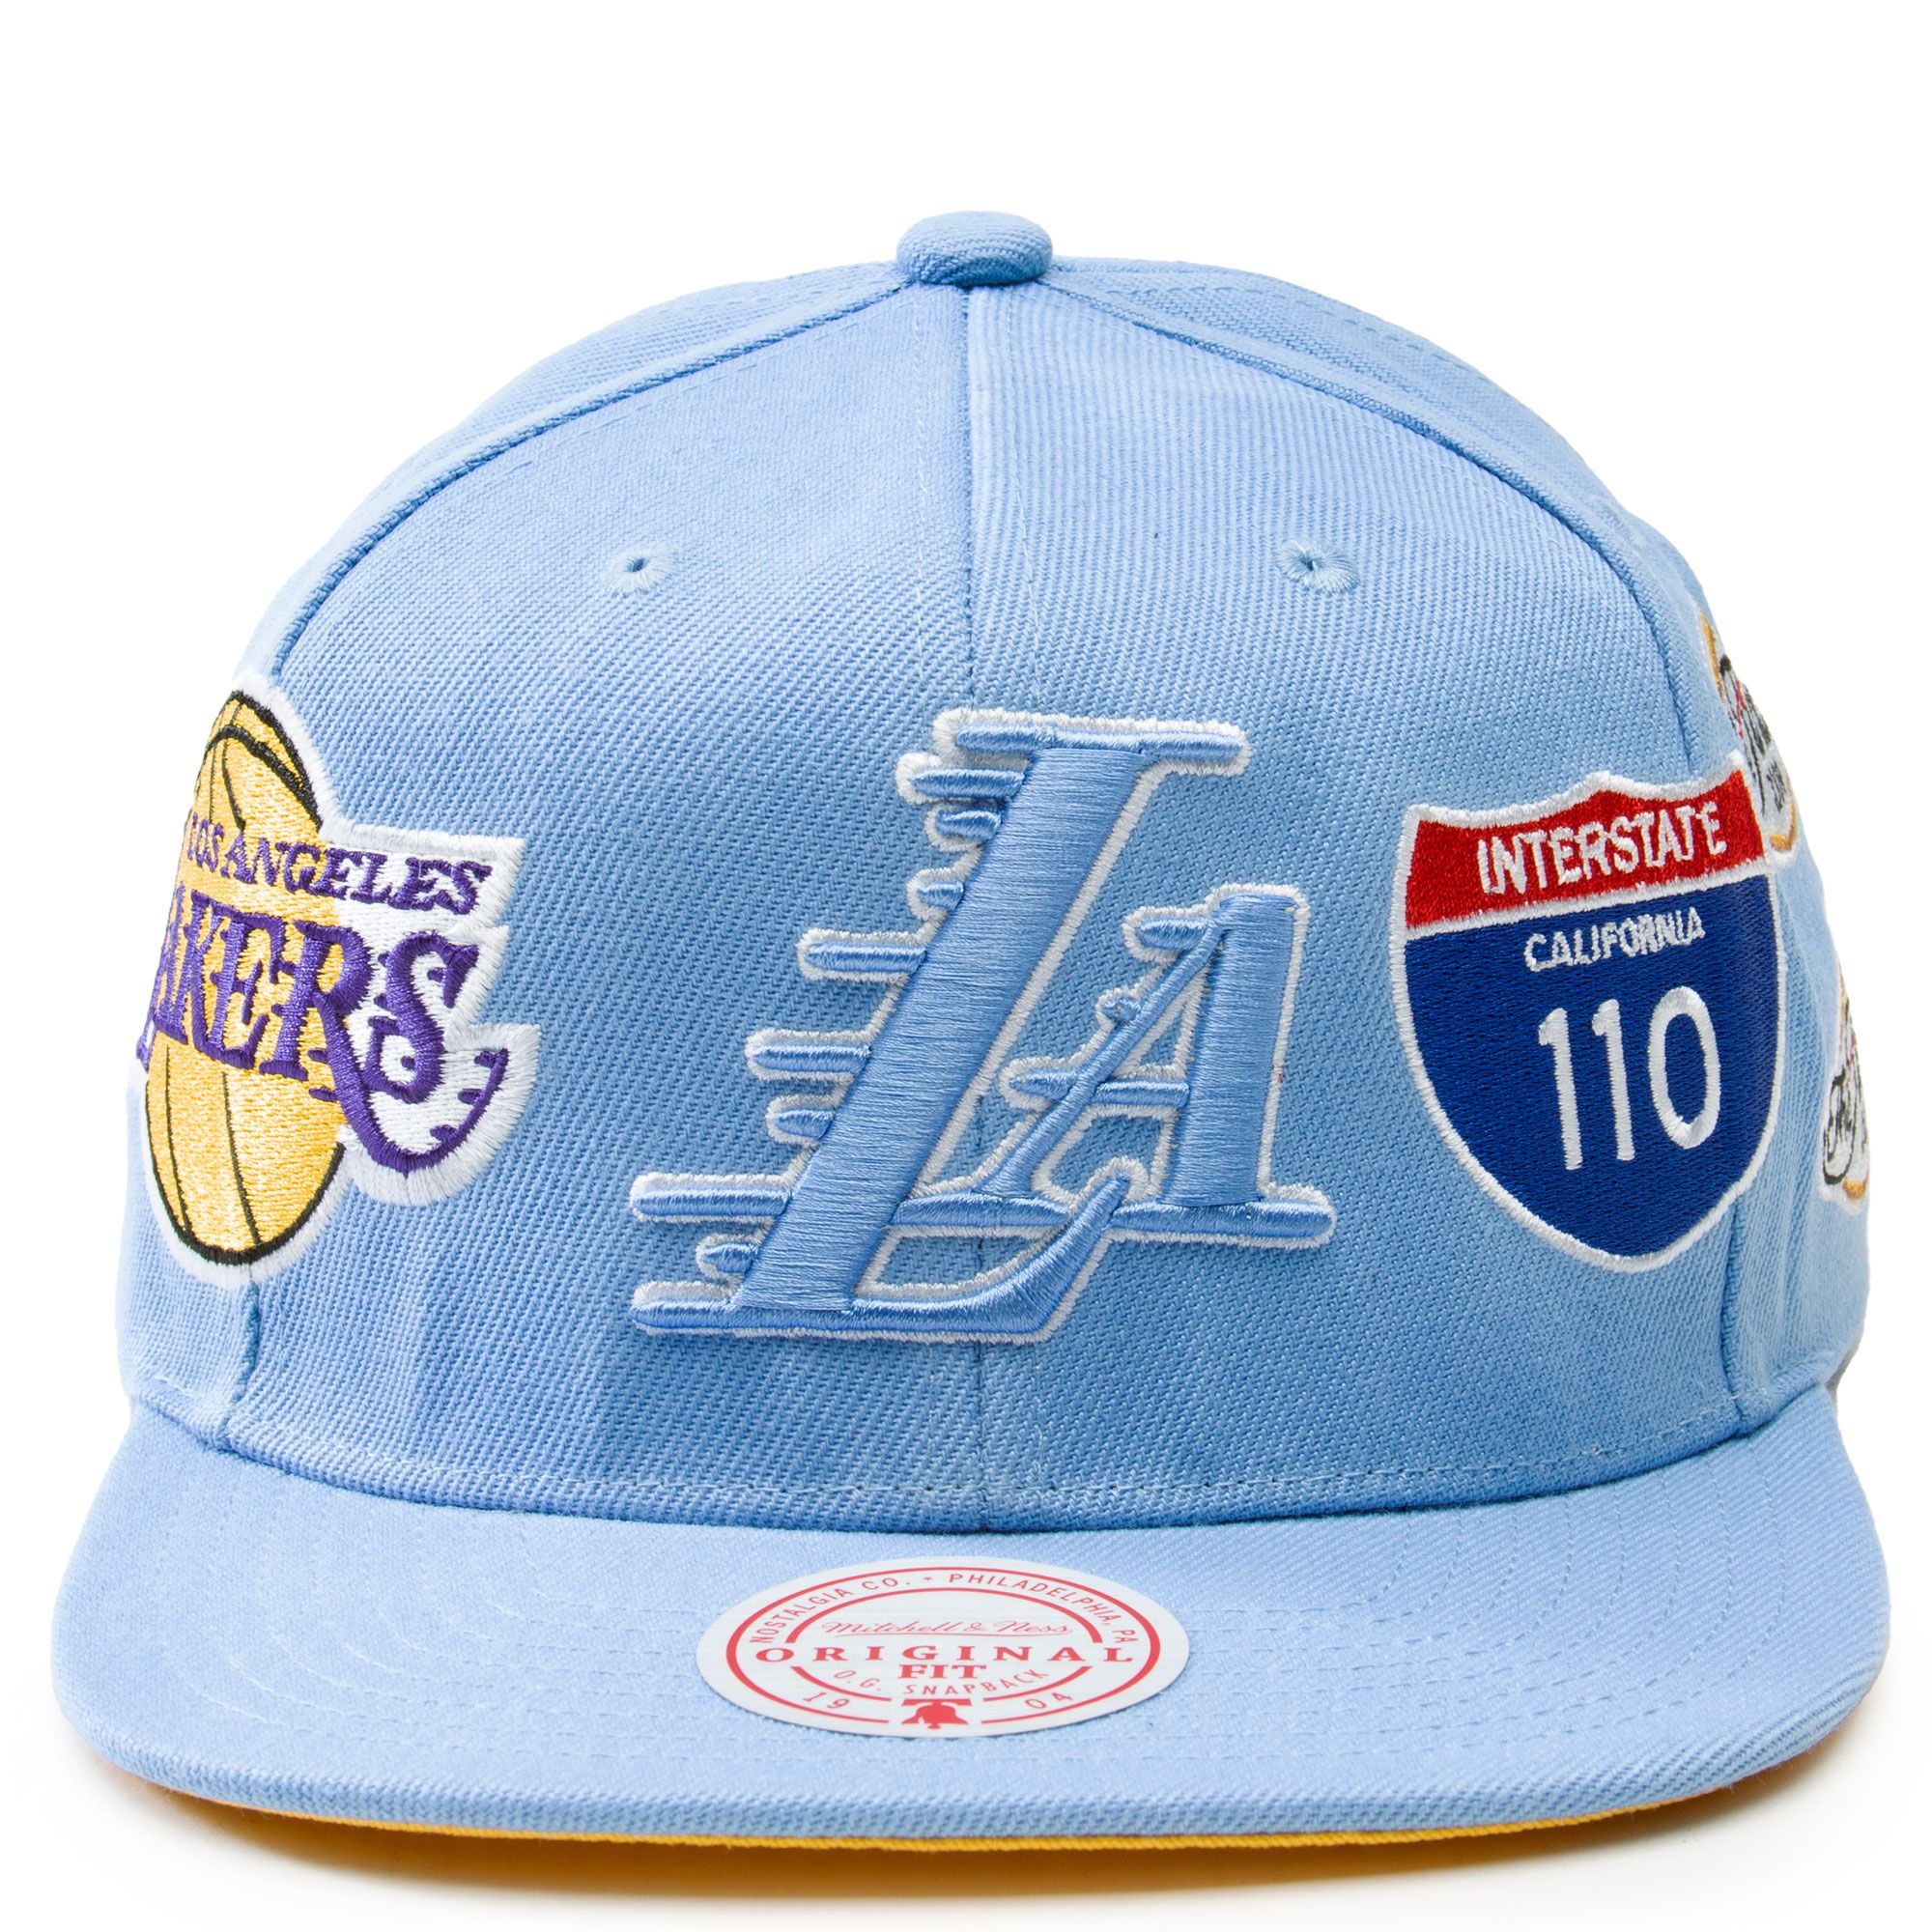 Men's Mitchell & Ness Black Los Angeles Lakers Champs Patch Snapback Hat